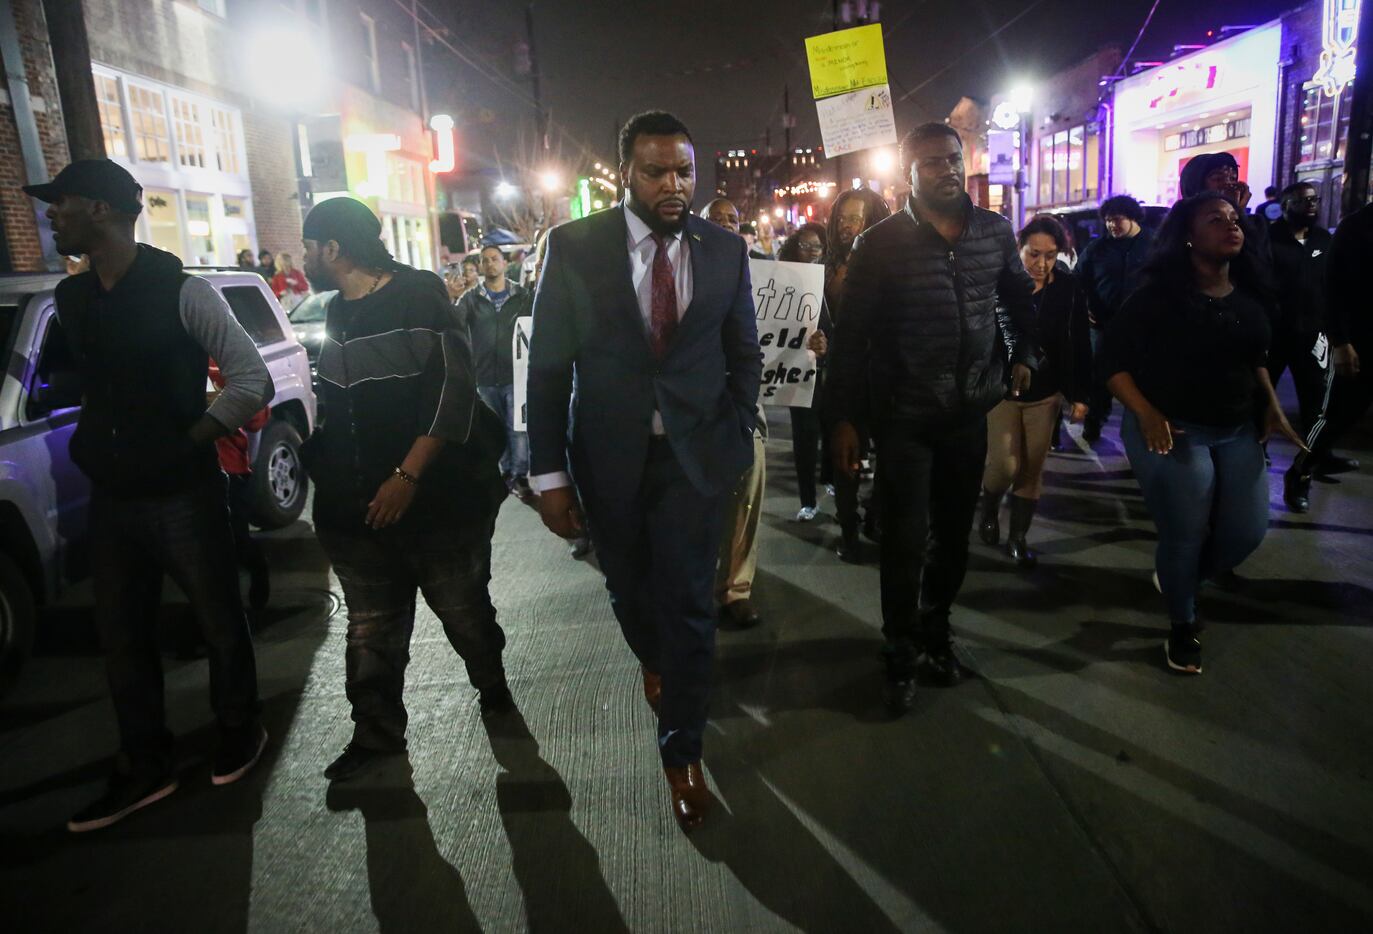 Attorney Lee Merritt, center with dress tie, joins demonstrators march through the street...